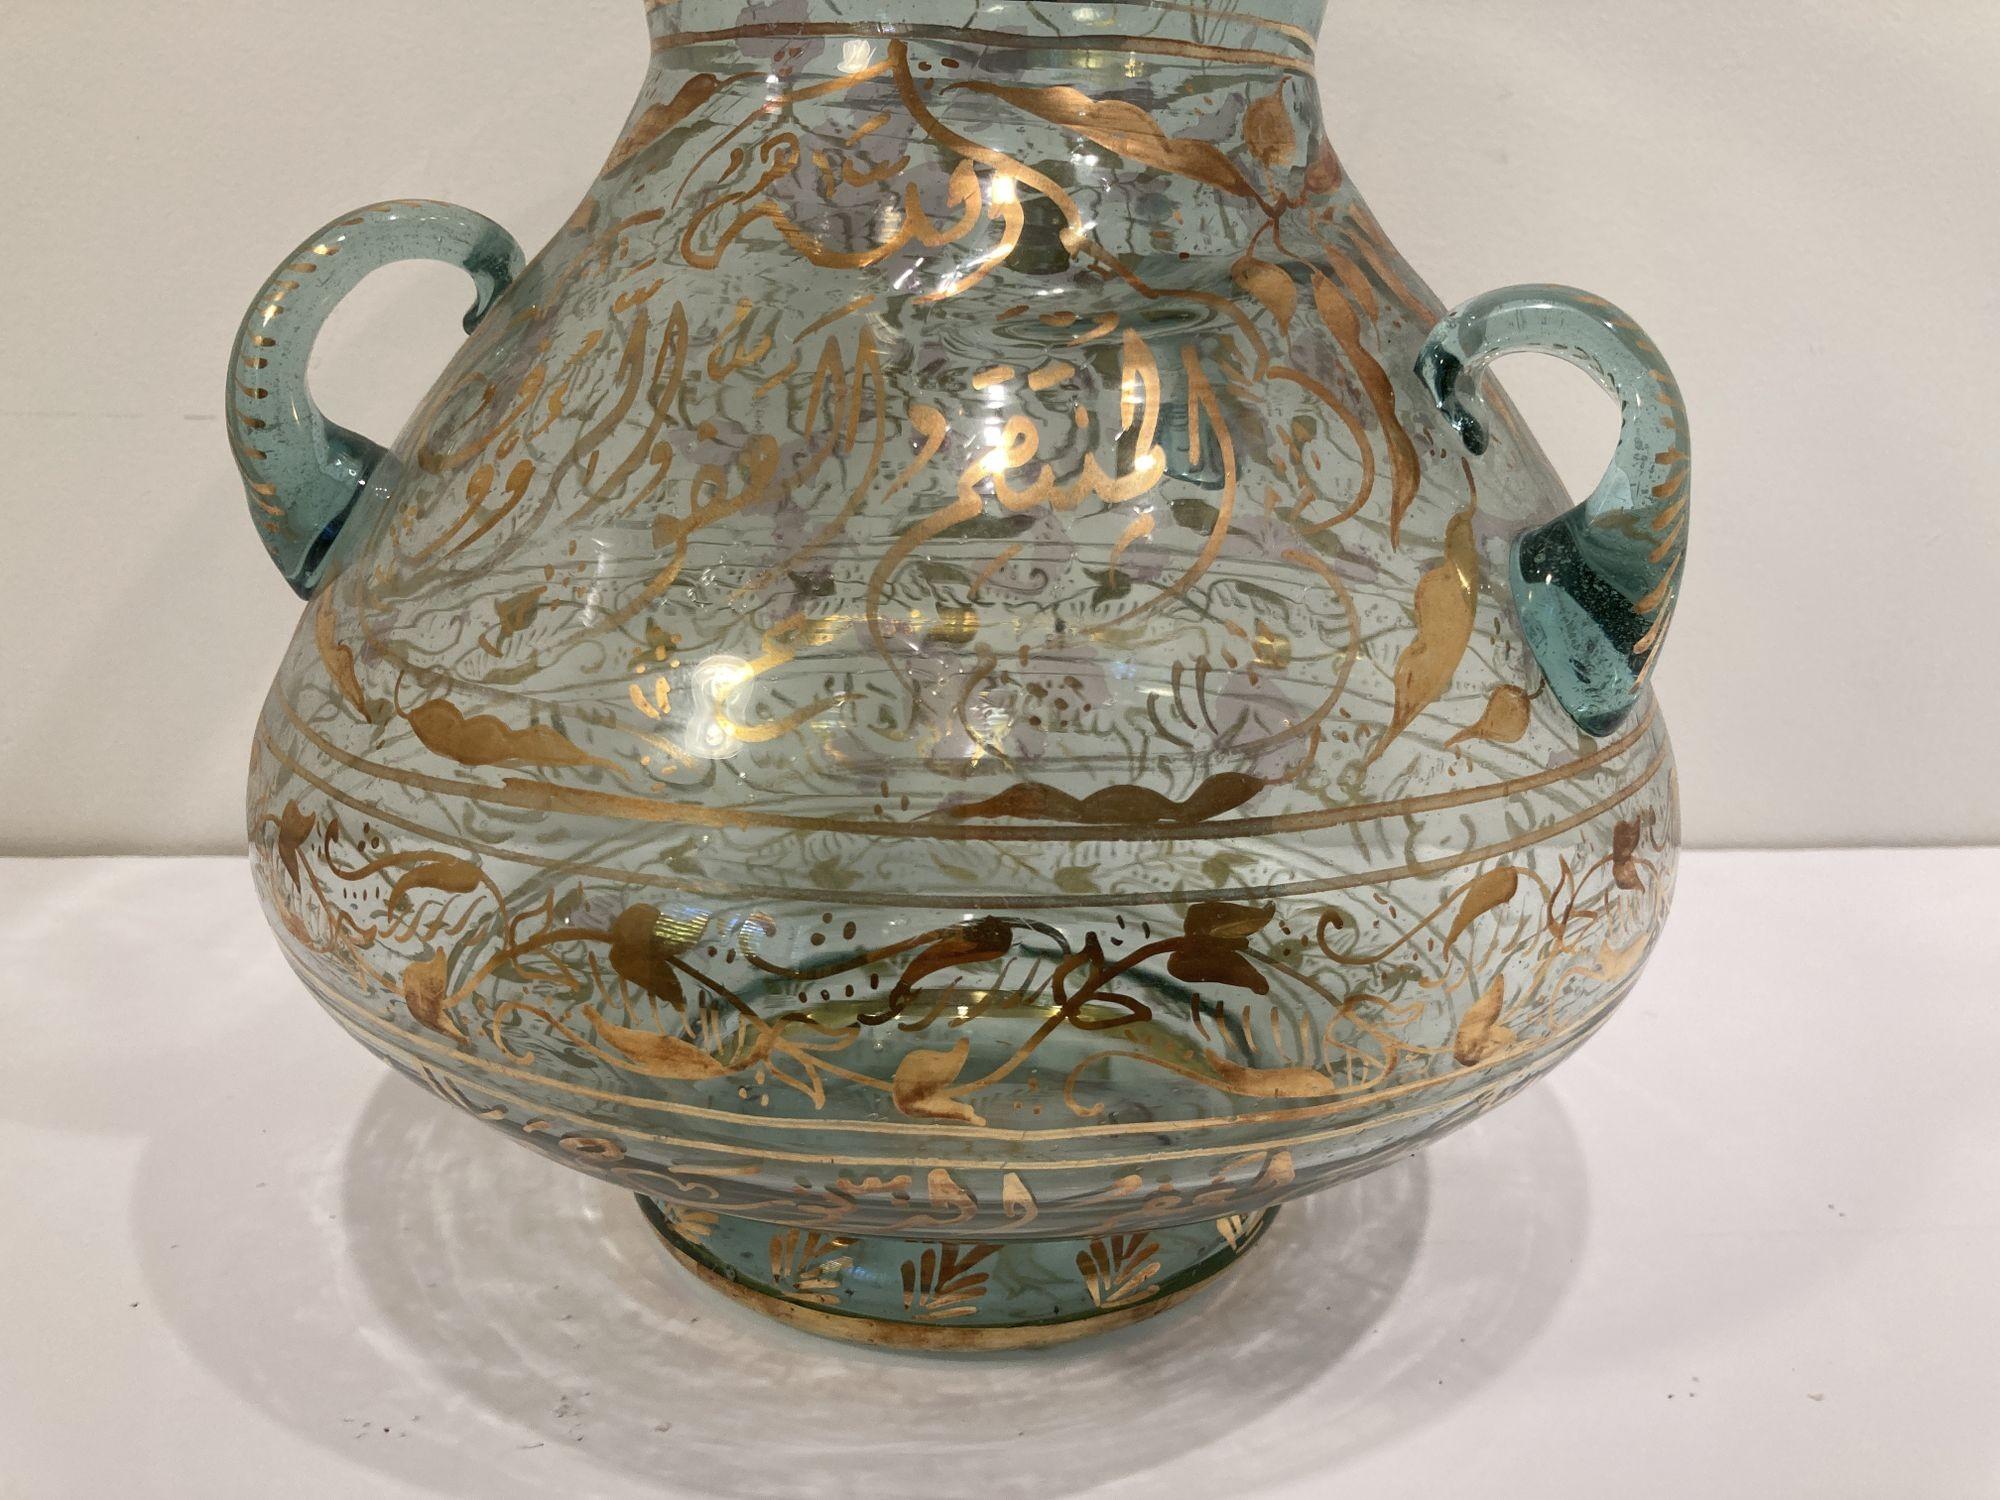 Handblown Mosque Glass Lamp in Mameluke Style Gilded with Arabic Calligraphy For Sale 7